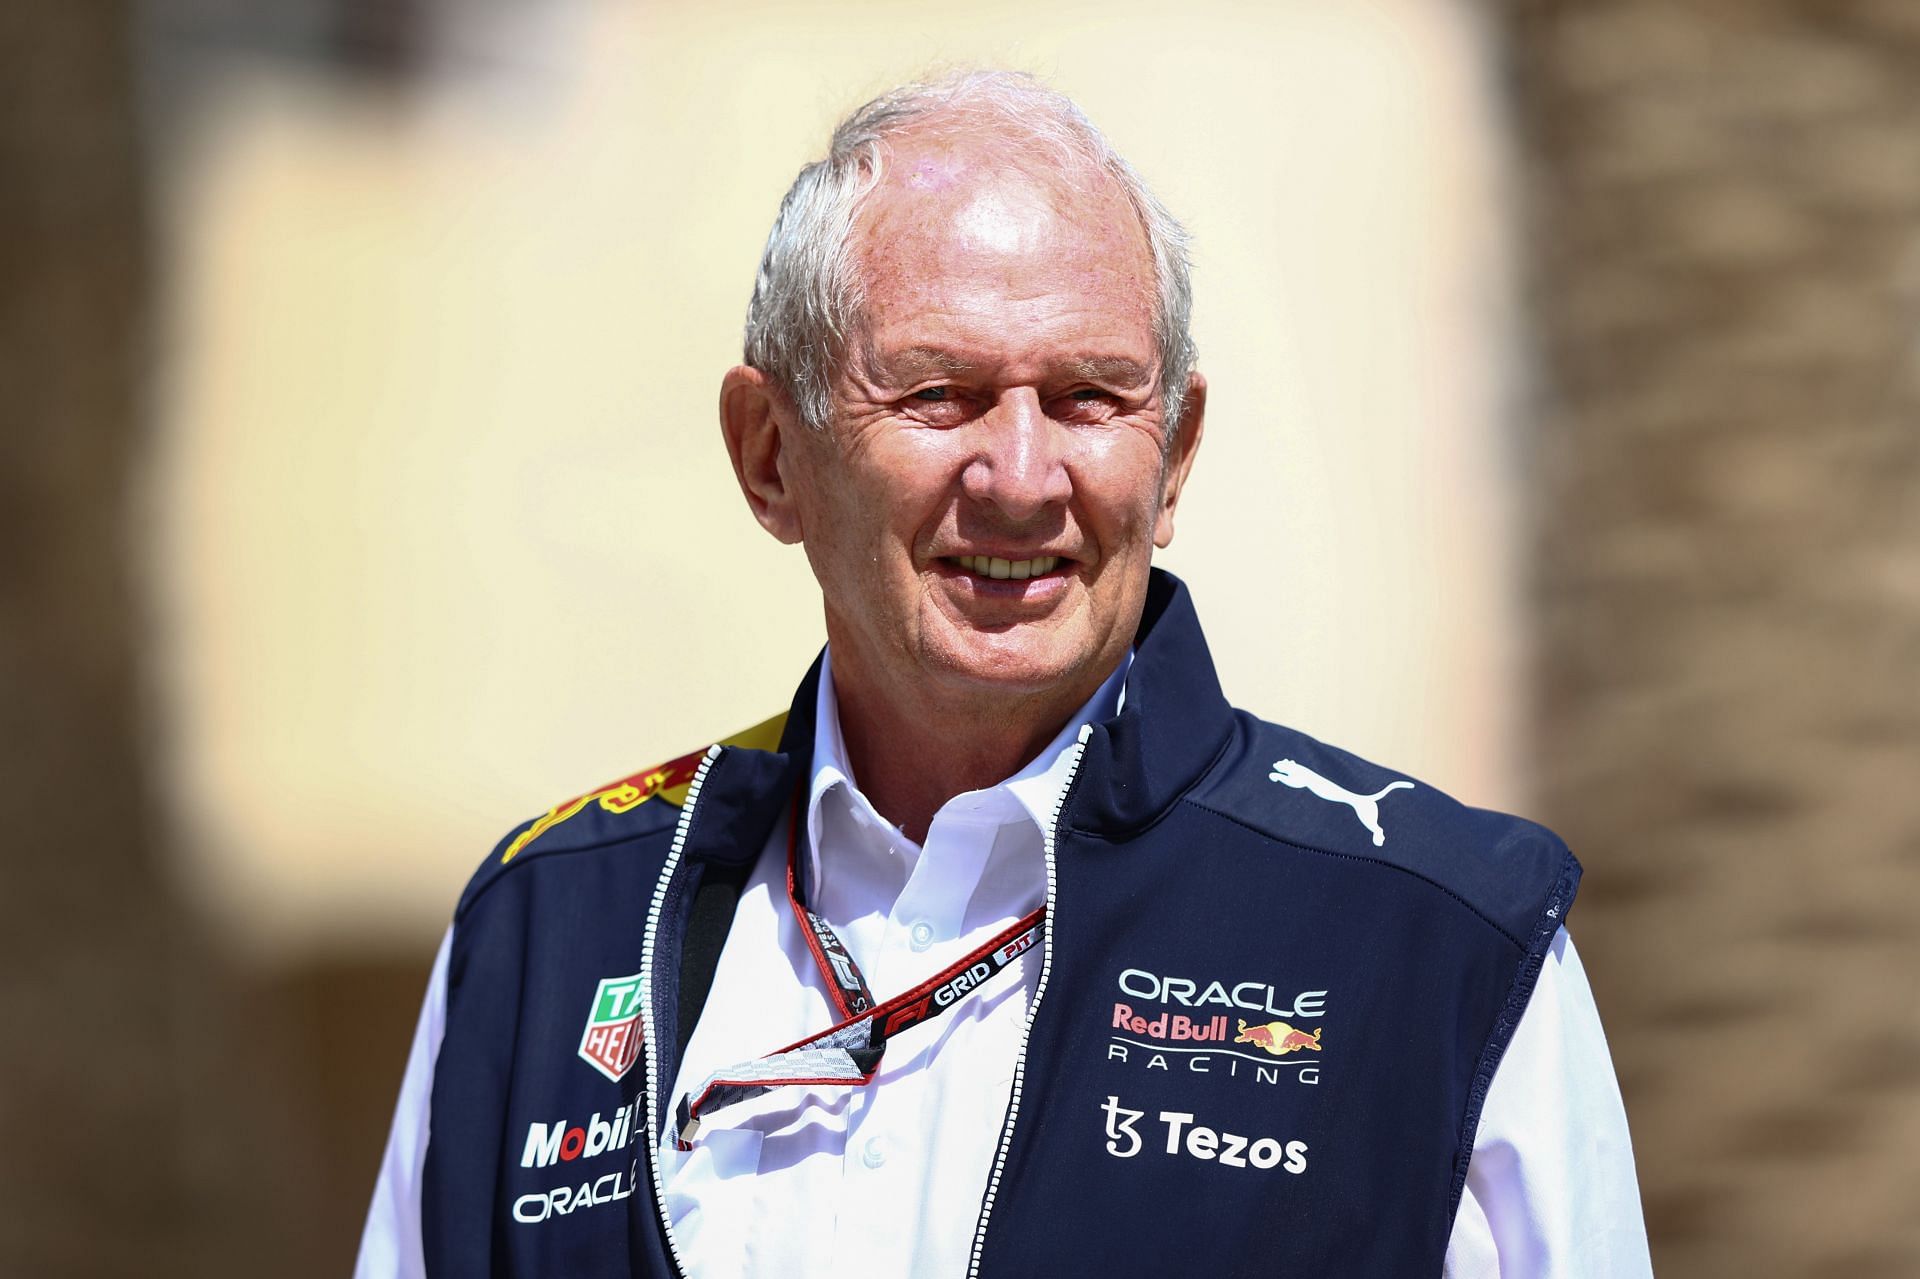 Red Bull Racing team consultant Dr. Helmut Marko looks on in the Paddock before practice ahead of the 2022 Bahrain GP (Photo by Mark Thompson/Getty Images)